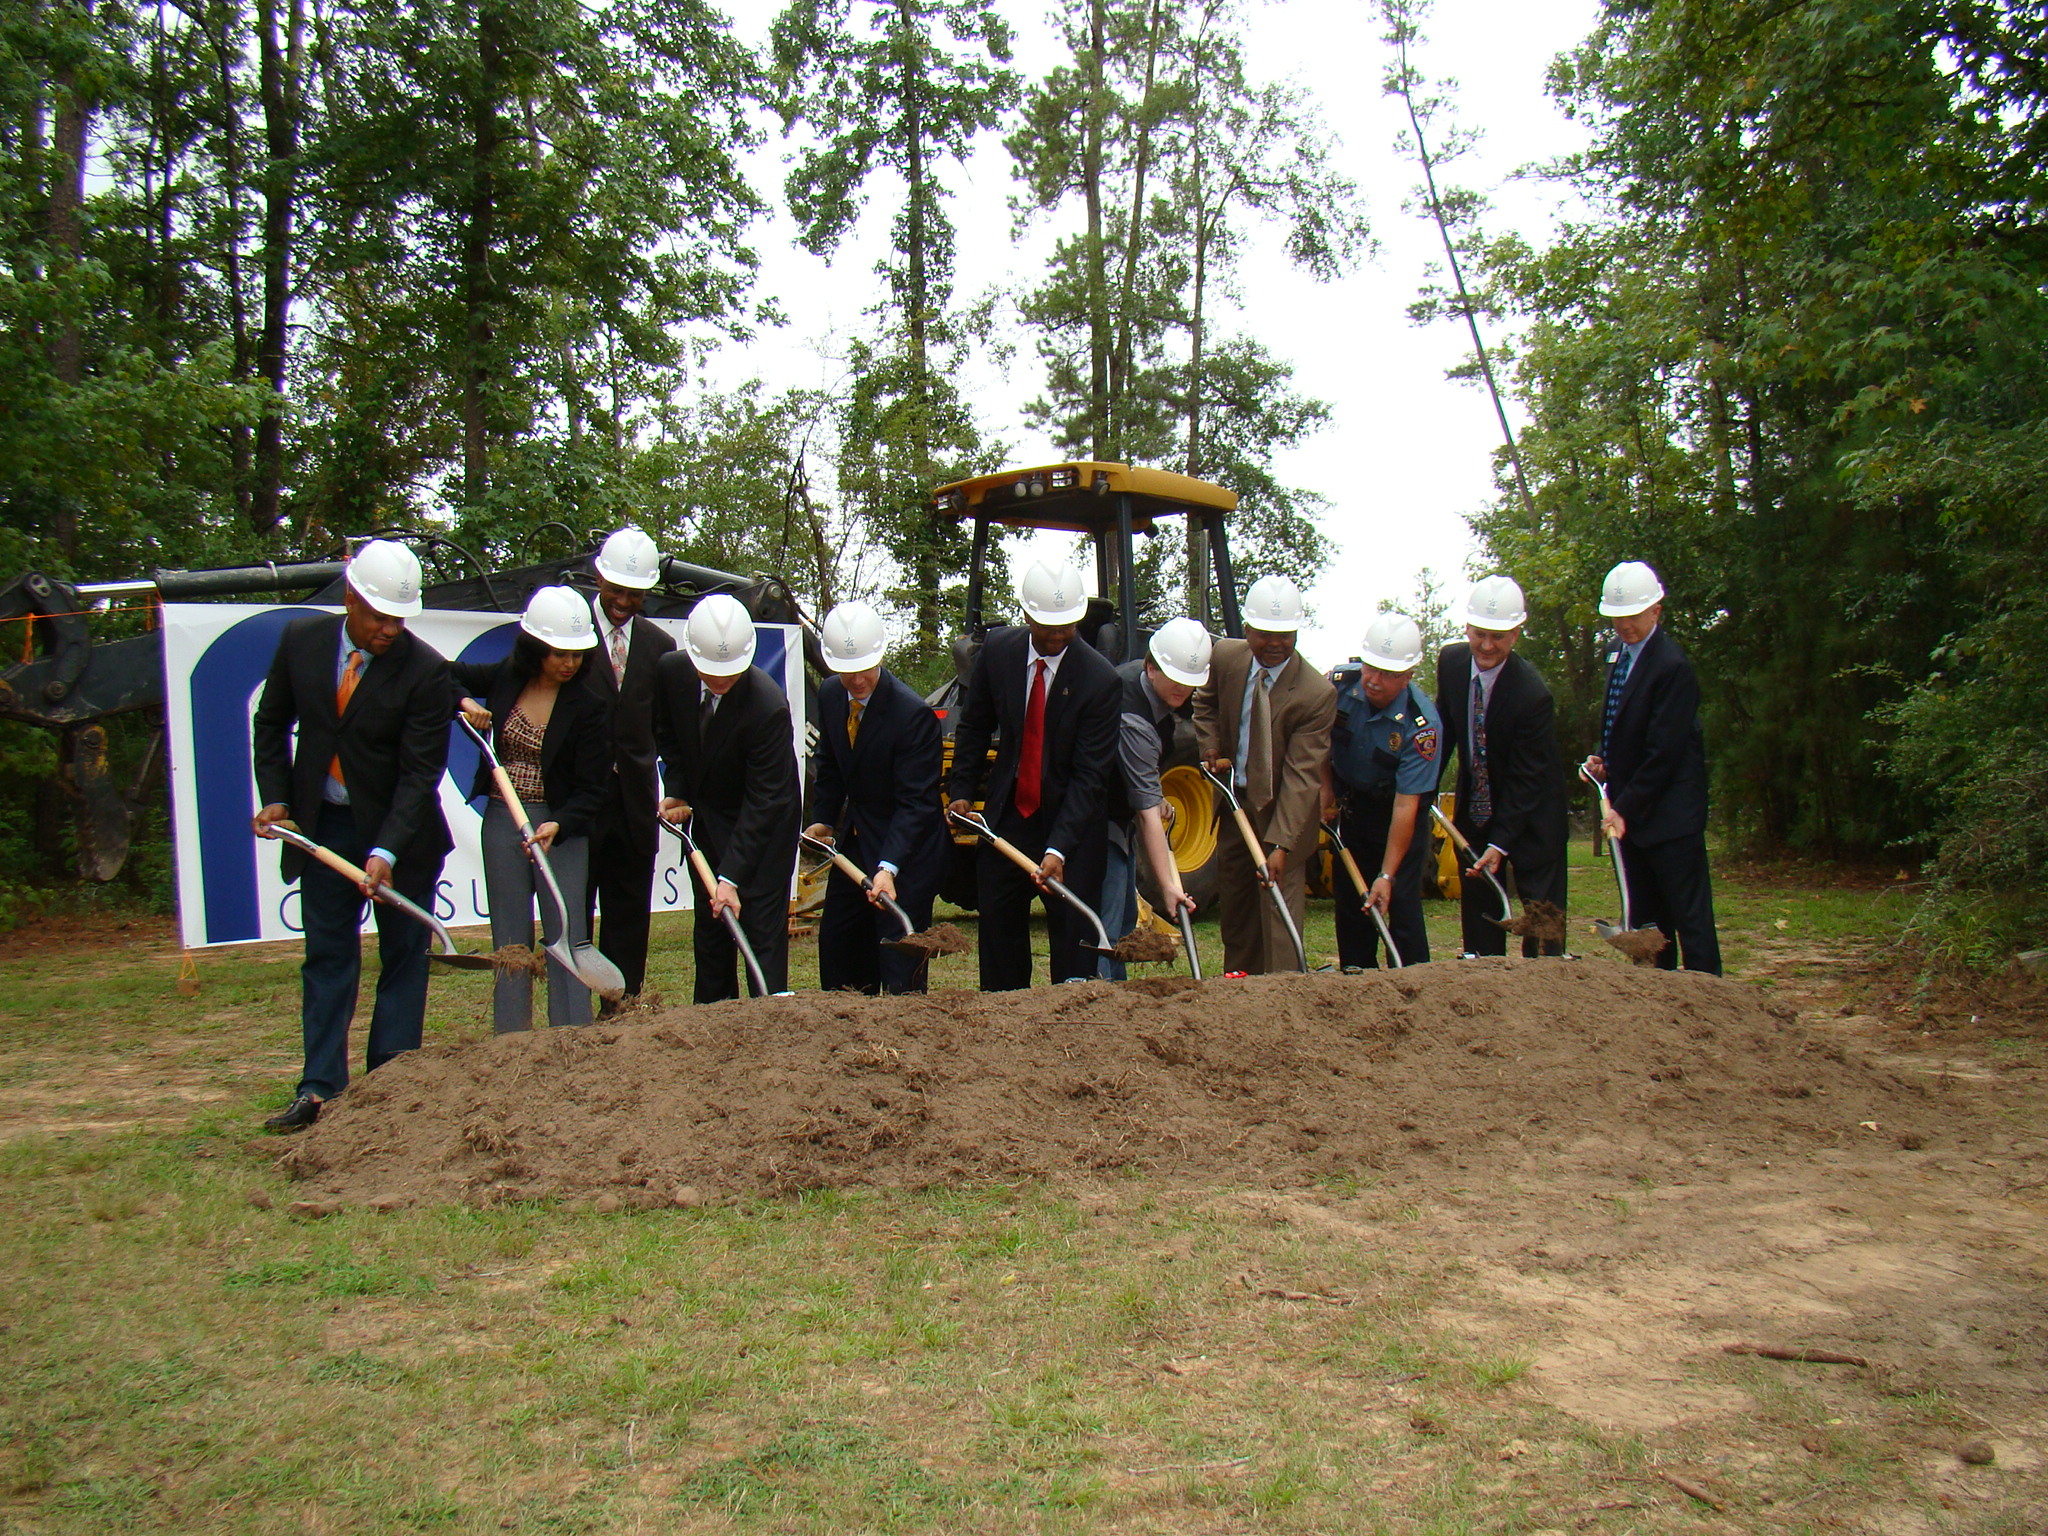 Participants shovel dirt as part of the groundbreaking ceremony for Lone Star College-Montgomerys new parking garage. From l. to r.: Patrick Johnson, general contractor, Johnson Group USA; Rashmi Murthy, Harrison Kornberg; James Harrison, Harrison Kornberg; Daniel Kornberg, Harrison Kornberg; Ed Shoemake, Jones Lang Lasalle; Dr. Austin Lane, president of LSC-Montgomery; Chris Baker, LSC-Montgomery student; Don Kerl, Diggs Construction; Charlie Soliz, LSC-Montgomery police captain; David Kaczynski, LSCS project director; and Jim Taylor, LSC-Montgomery vice president of administrative services.